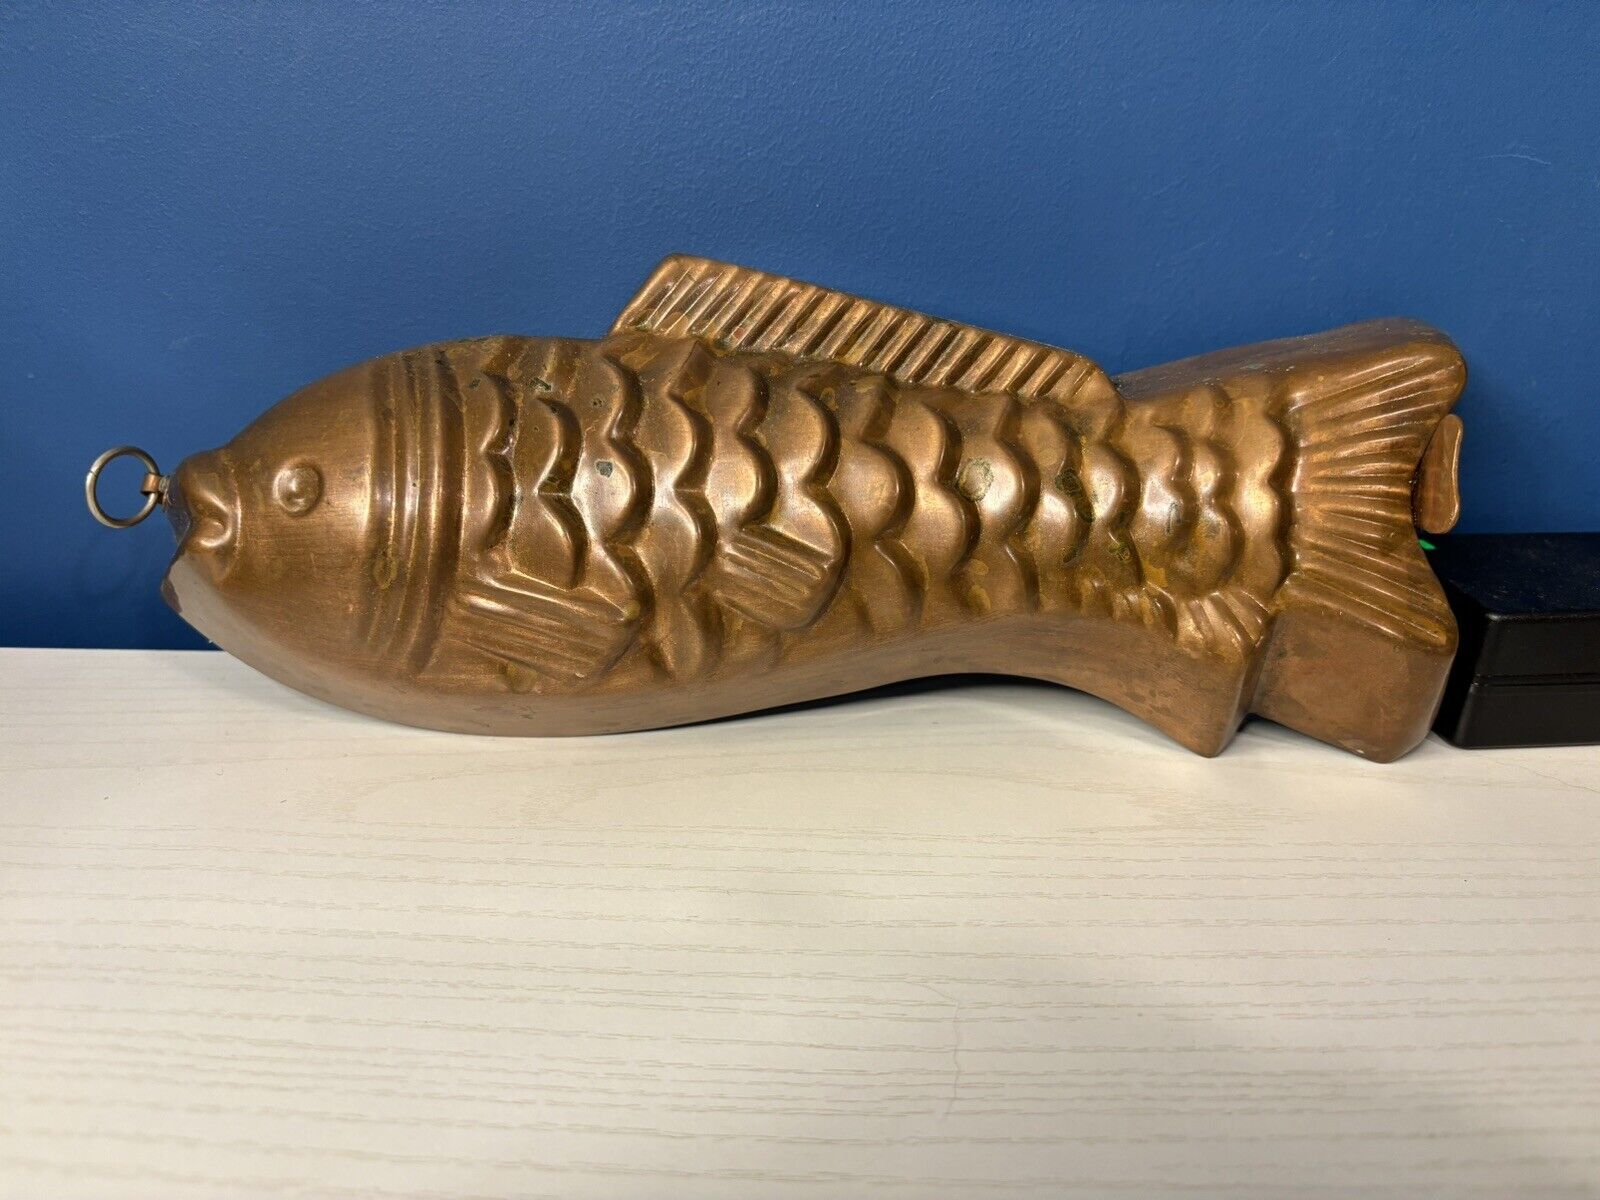 Vintage Heavy Copper Fish Mold Antique Coastal Beach Decor - Made In Germany